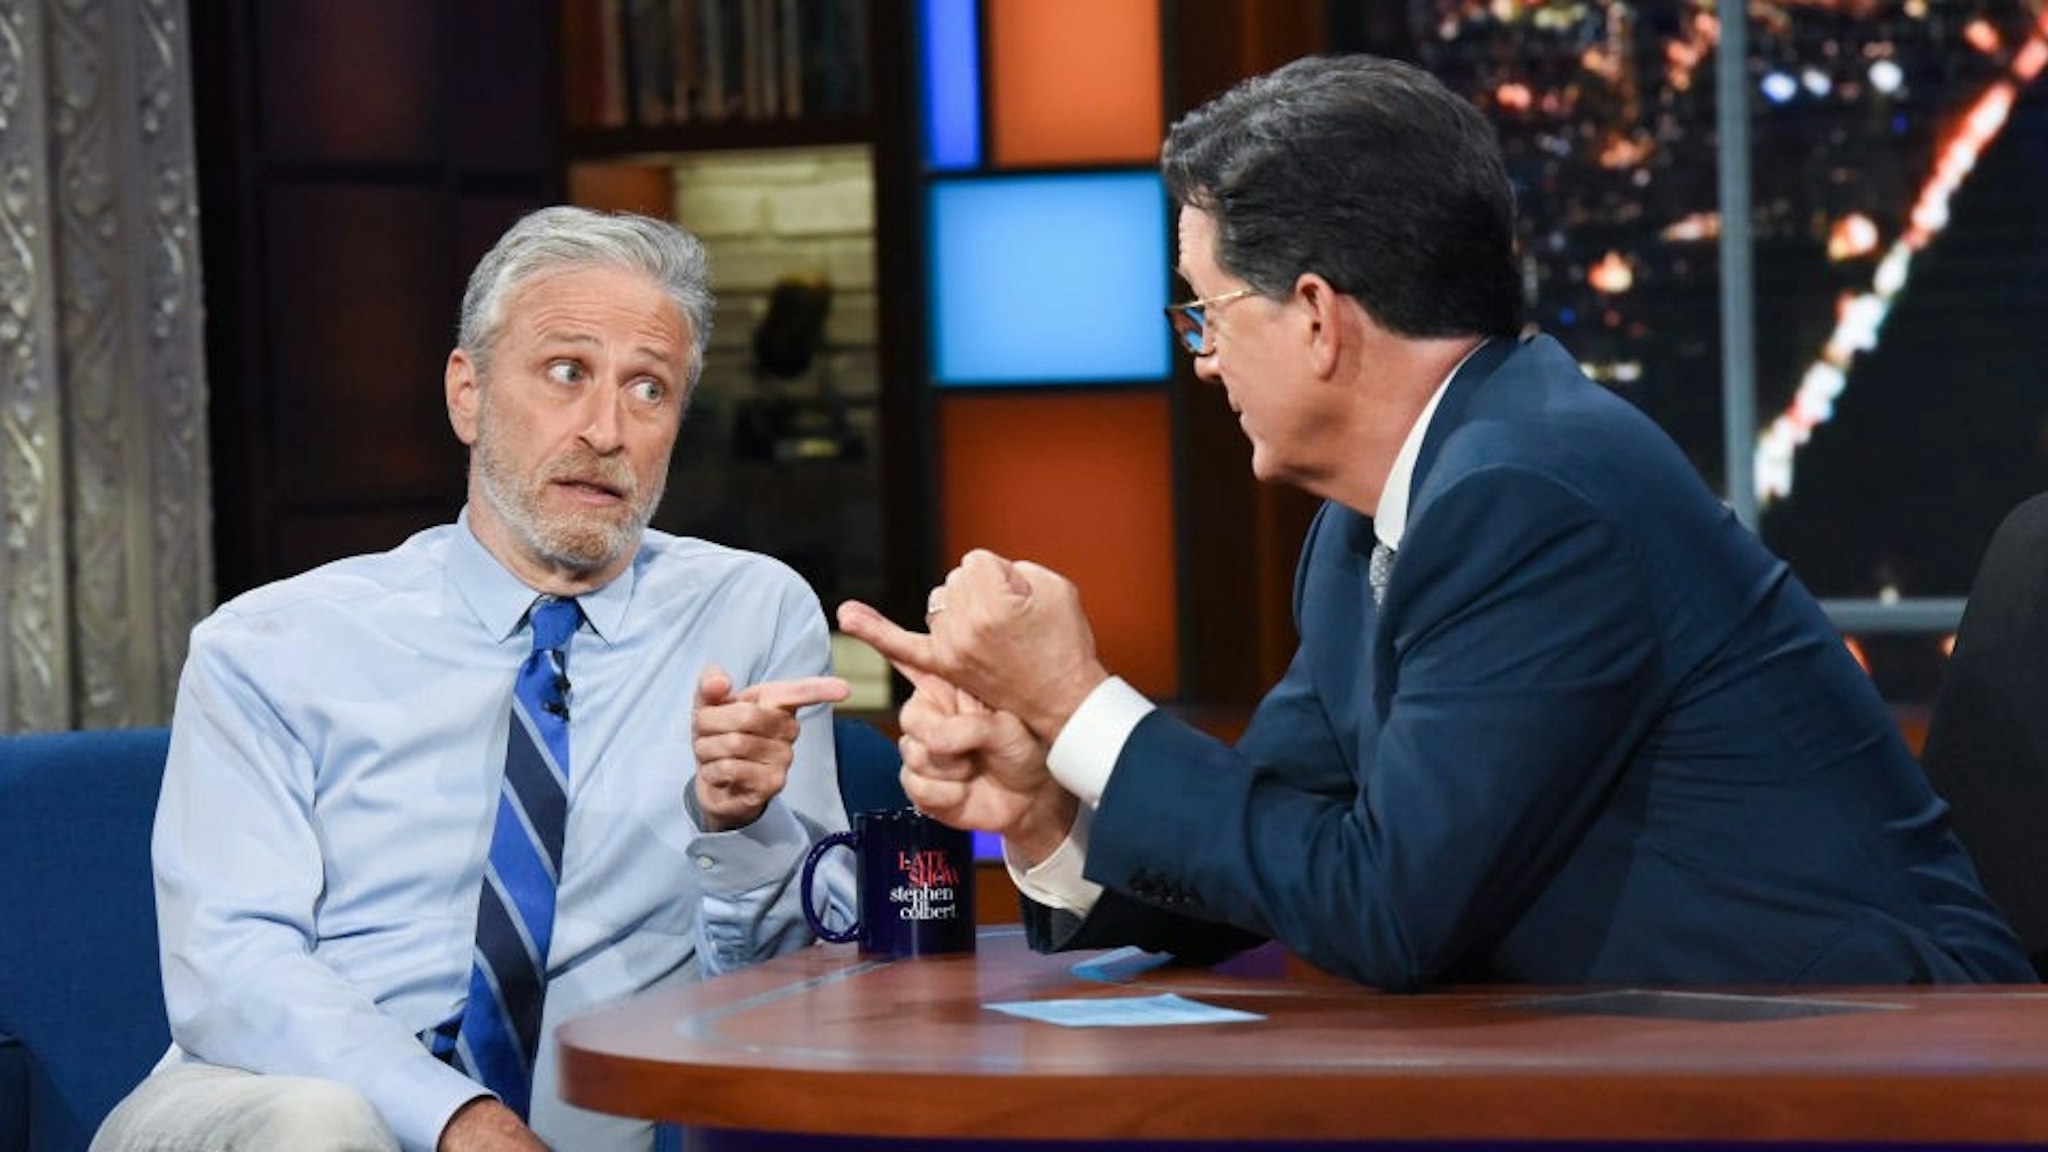 NEW YORK - JUNE 14: The Late Show with Stephen Colbert and guest Jon Stewart during Mondays June 14, 2021 show. (Photo by